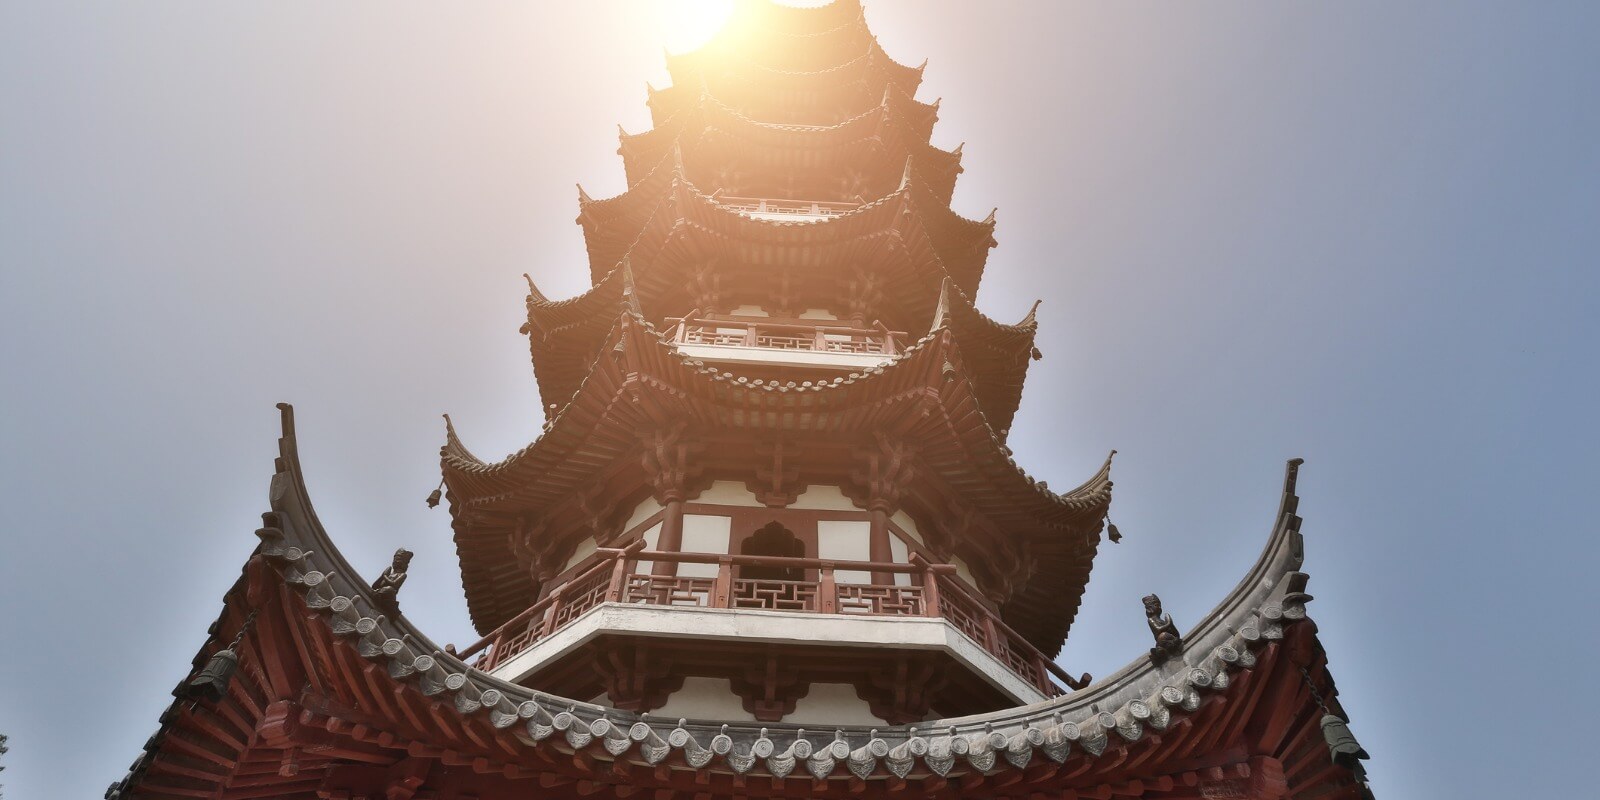 6 Attractions to See in Suzhou, China